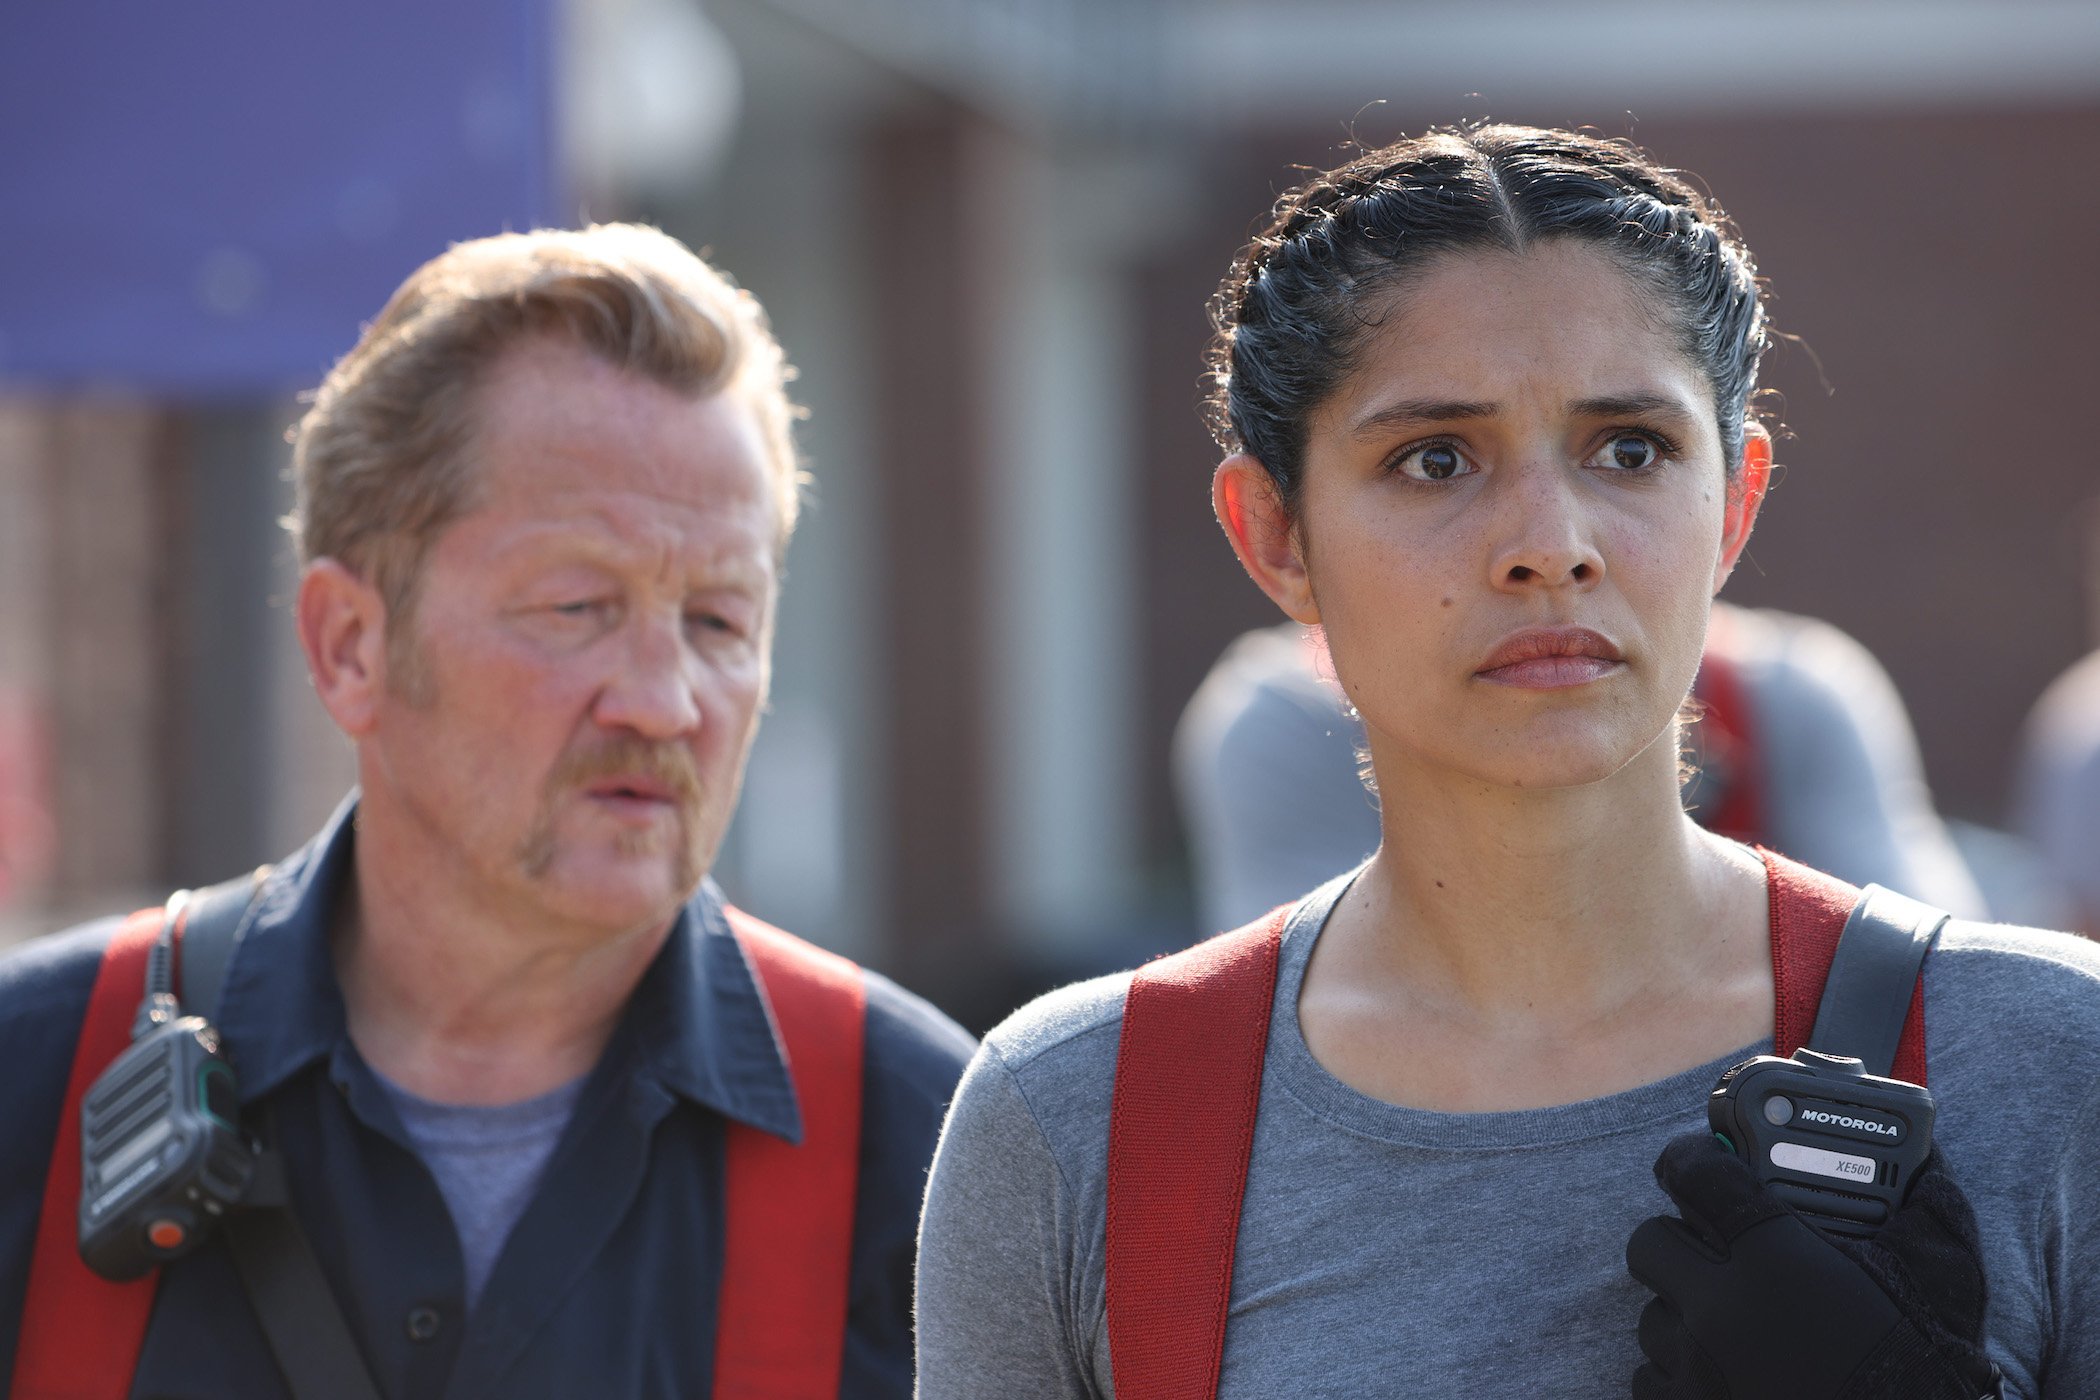 Randall Mouch McHolland and Stella Kidd from 'Chicago Fire' Season 10 premiere. 'Chicago Fire' Season 10 spoilers explain who lives from the boat rescue mission.